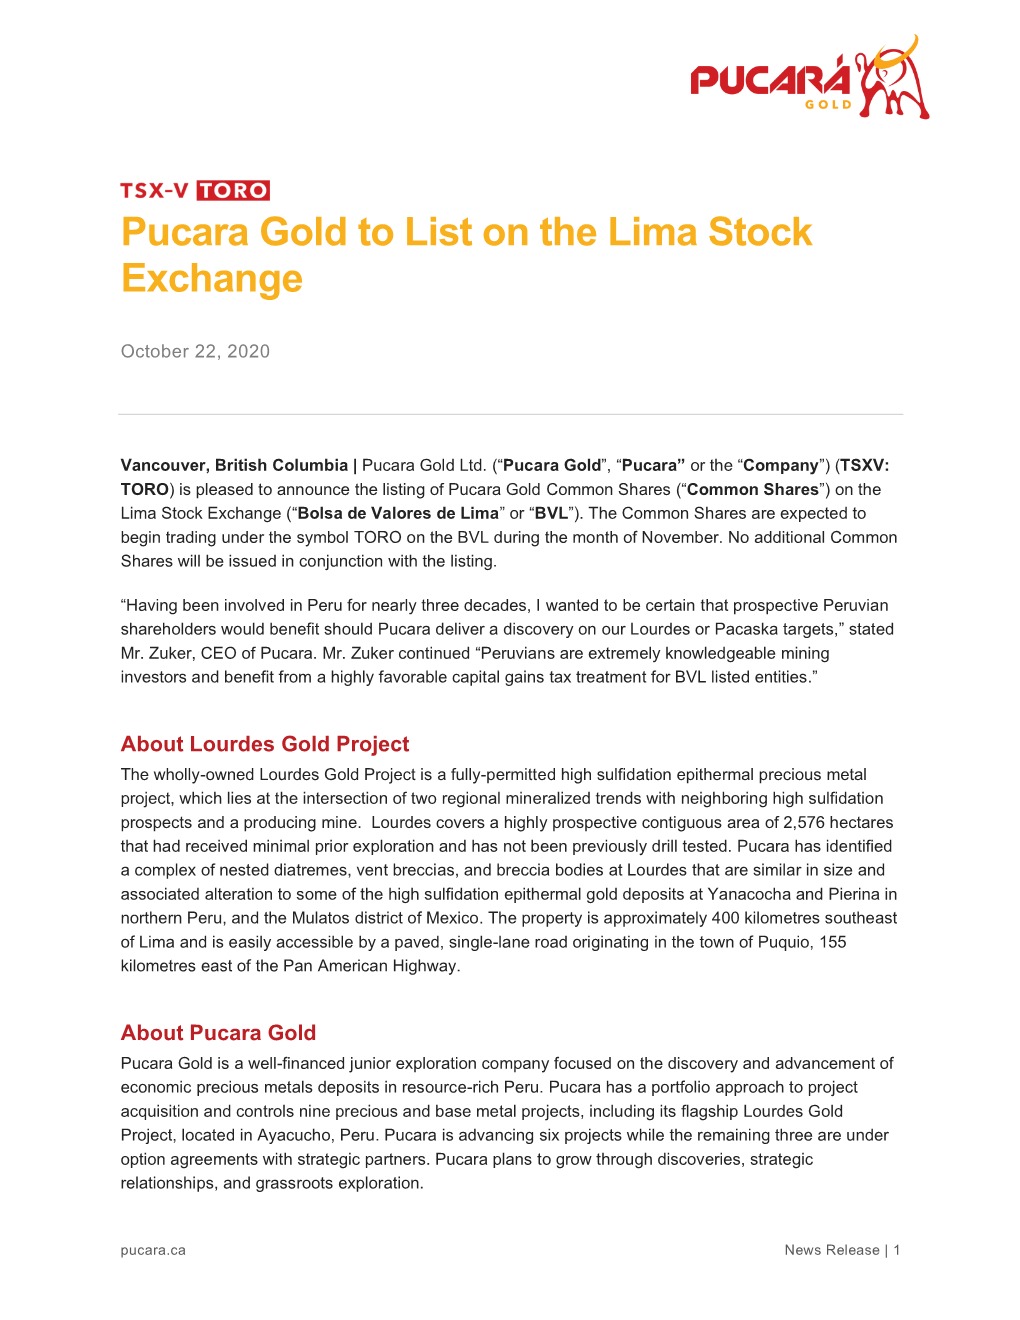 Pucara Gold to List on the Lima Stock Exchange